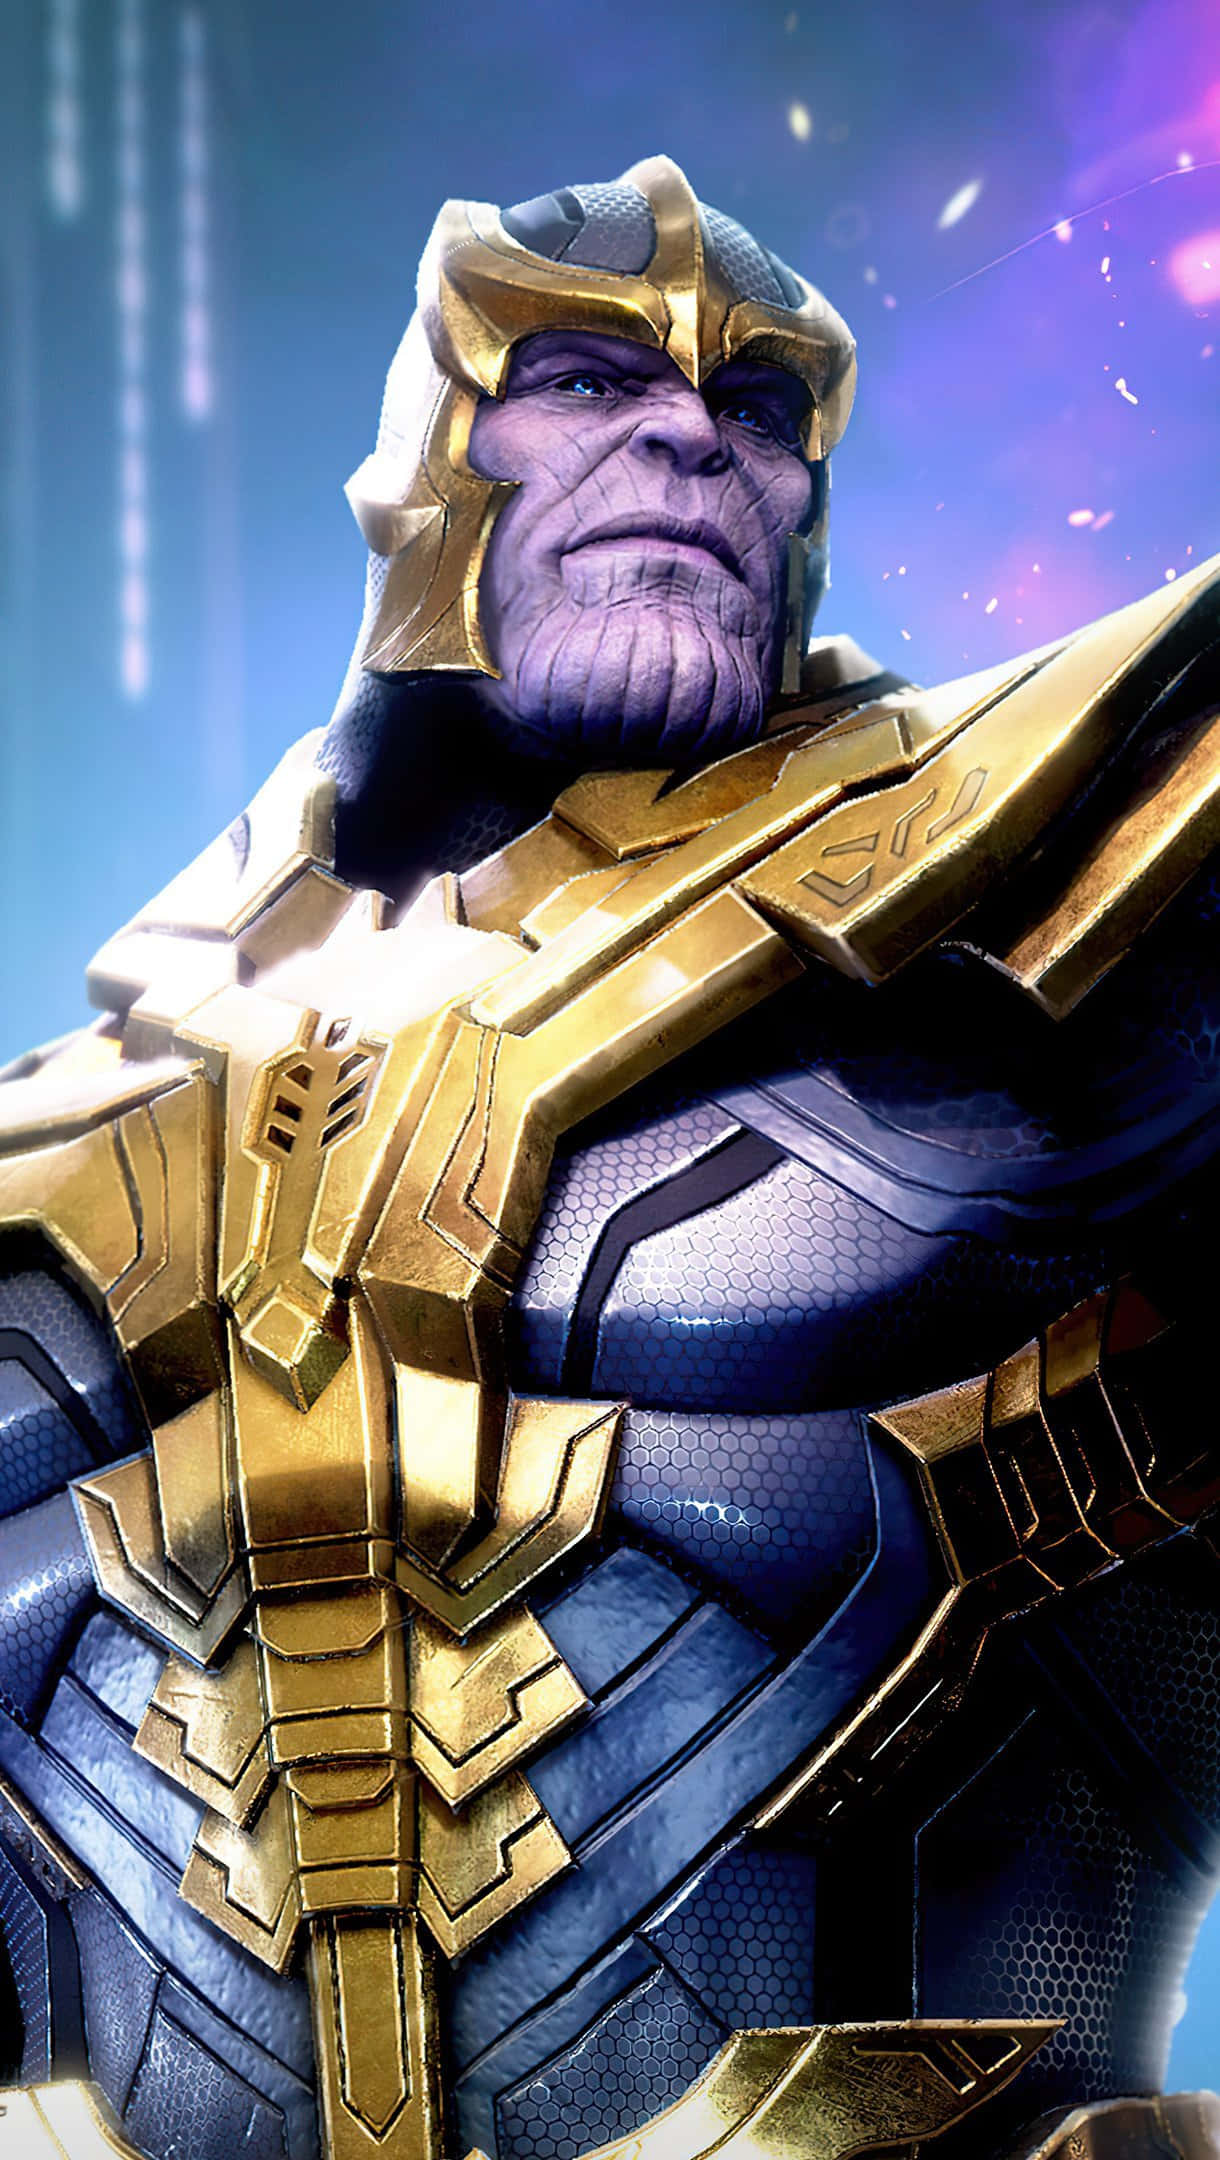 Marvel's Thanos looming in front of a starry sky